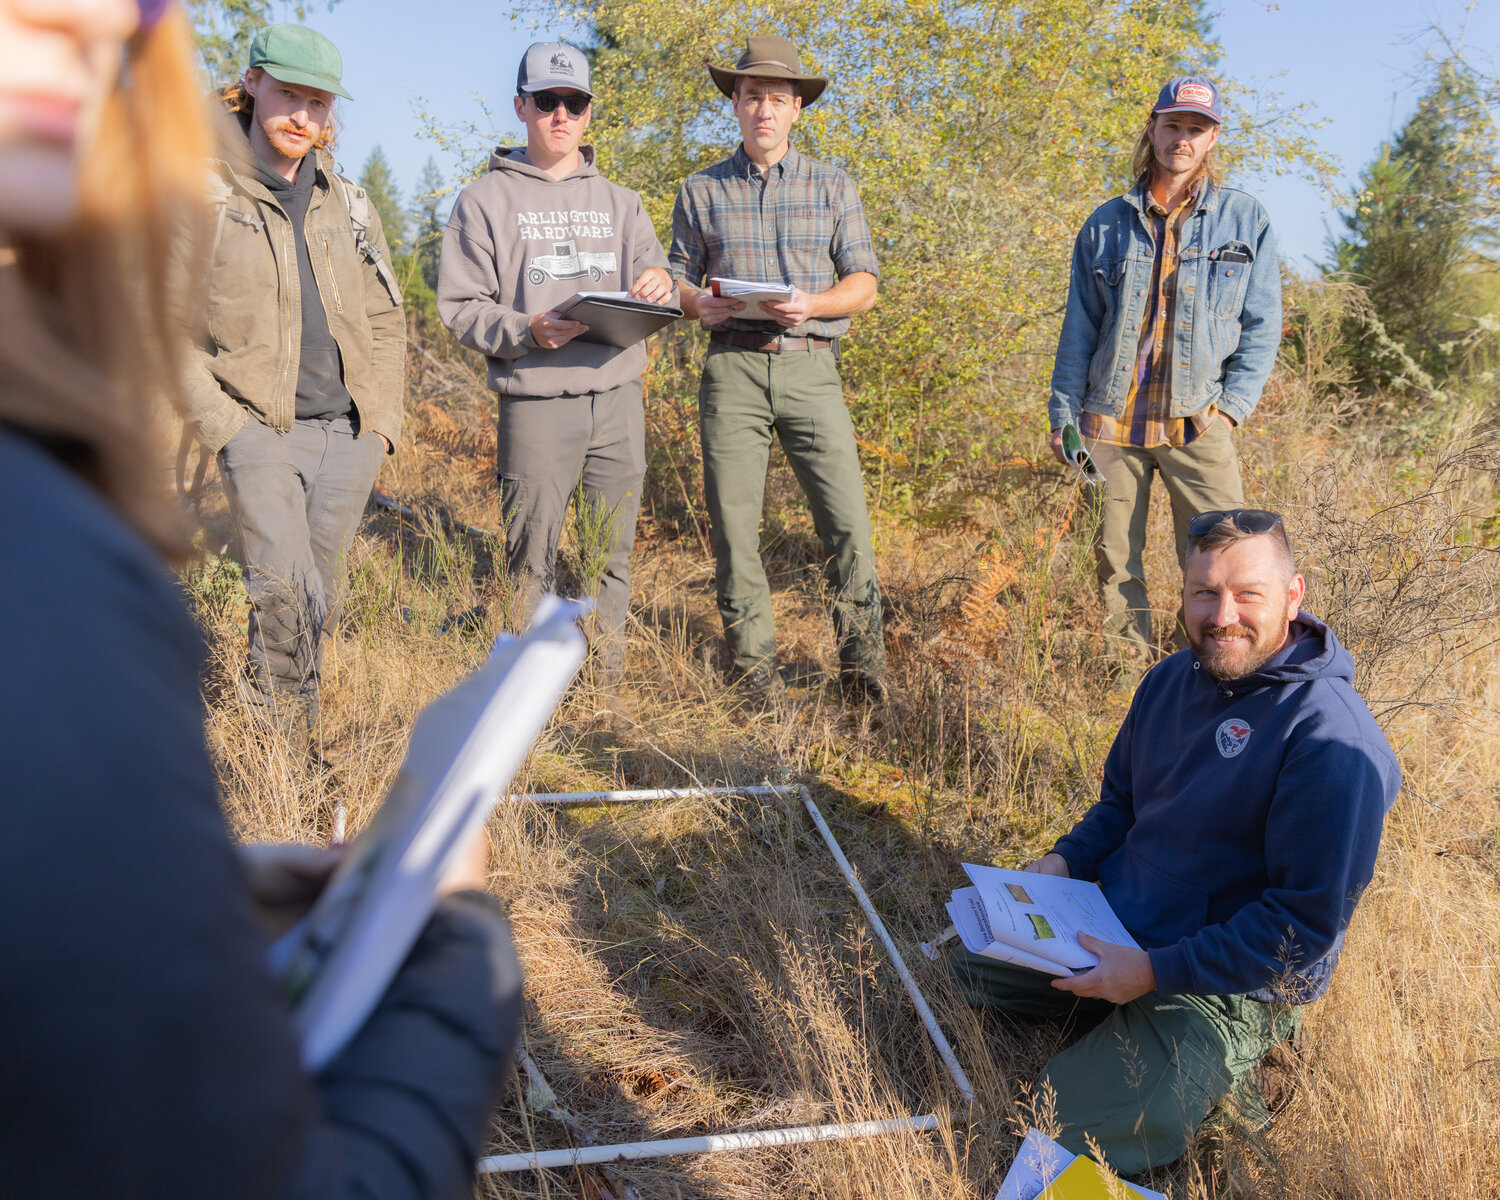 Certified Burner Program Manager Kyle Lapham, with the Department of Natural Resources, smiles during while leading a training on prescribed burning at West Rocky Prairie near Tenino on Thursday, Sept. 21.